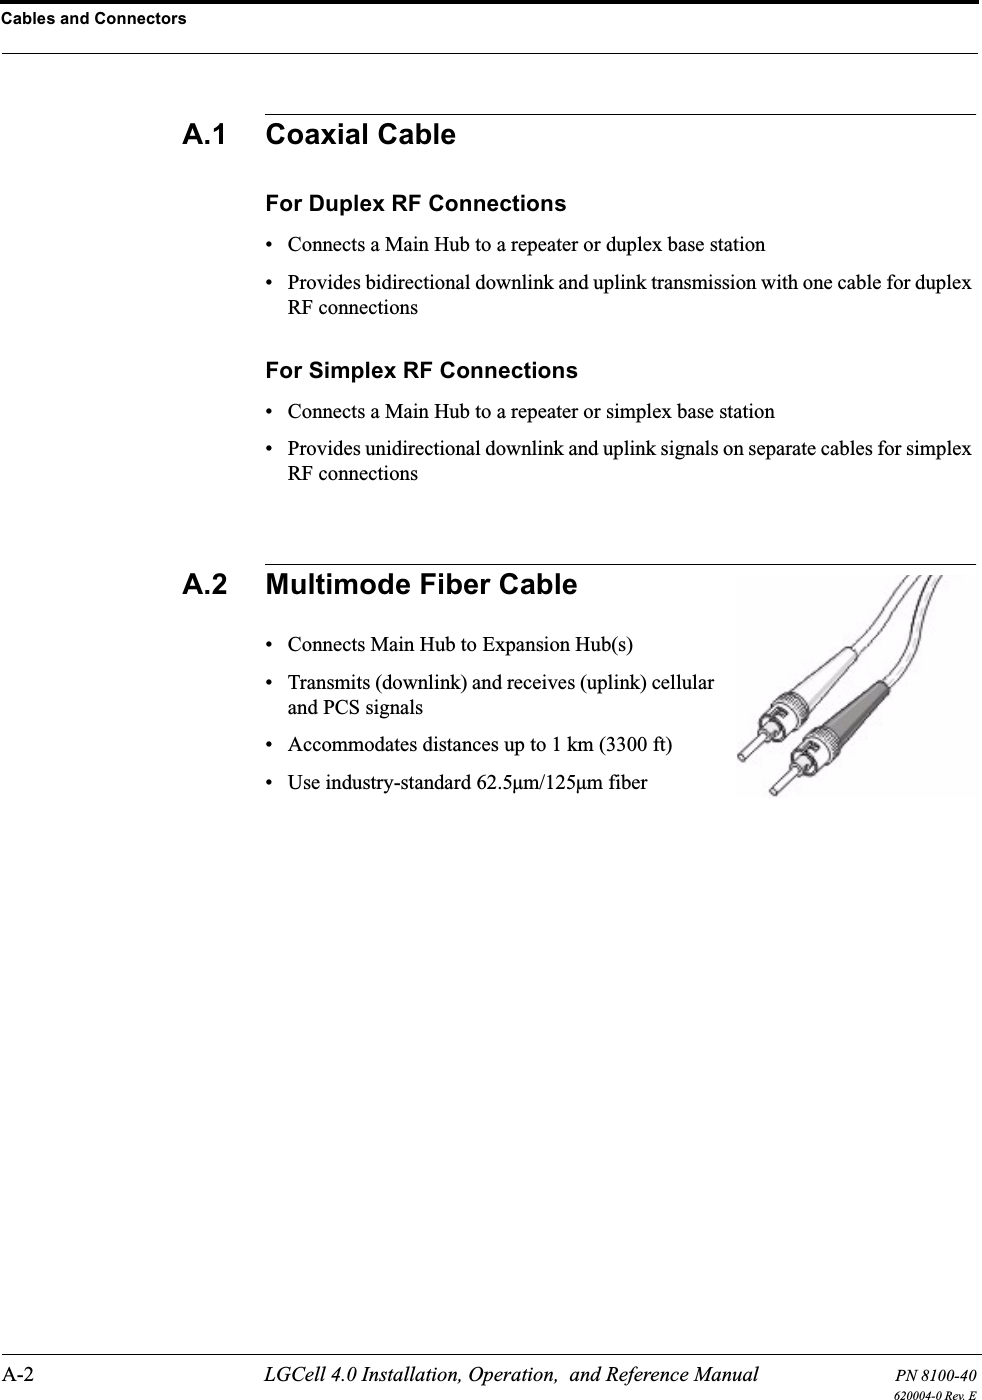 Cables and ConnectorsA-2 LGCell 4.0 Installation, Operation,  and Reference Manual PN 8100-40620004-0 Rev. EA.1 Coaxial CableFor Duplex RF Connections• Connects a Main Hub to a repeater or duplex base station• Provides bidirectional downlink and uplink transmission with one cable for duplex RF connectionsFor Simplex RF Connections• Connects a Main Hub to a repeater or simplex base station• Provides unidirectional downlink and uplink signals on separate cables for simplex RF connectionsA.2 Multimode Fiber Cable• Connects Main Hub to Expansion Hub(s)• Transmits (downlink) and receives (uplink) cellular and PCS signals• Accommodates distances up to 1 km (3300 ft)• Use industry-standard 62.5µm/125µm fiber